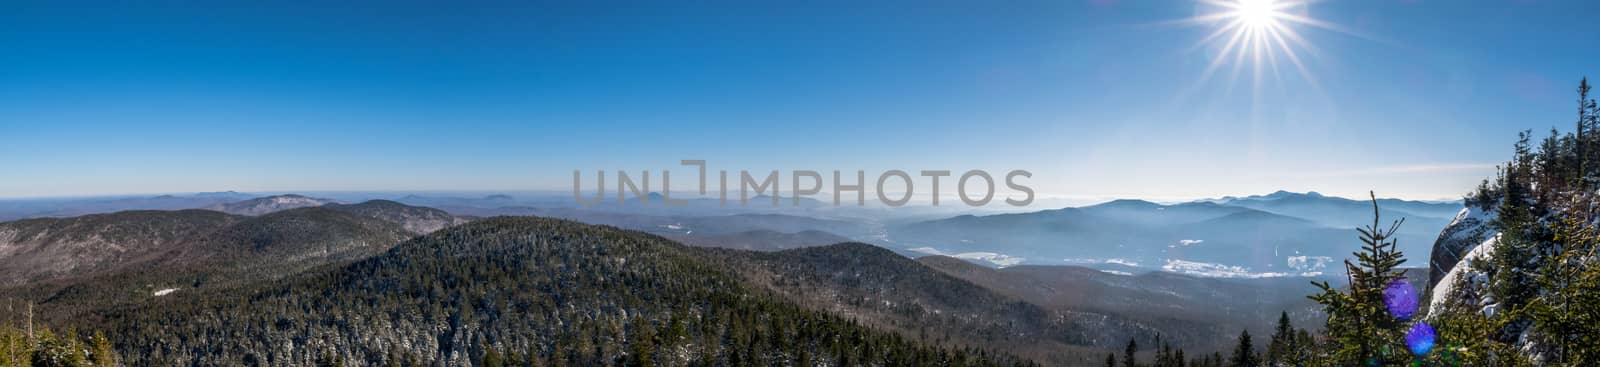 Panorama of winter mountain landscape by fpalaticky